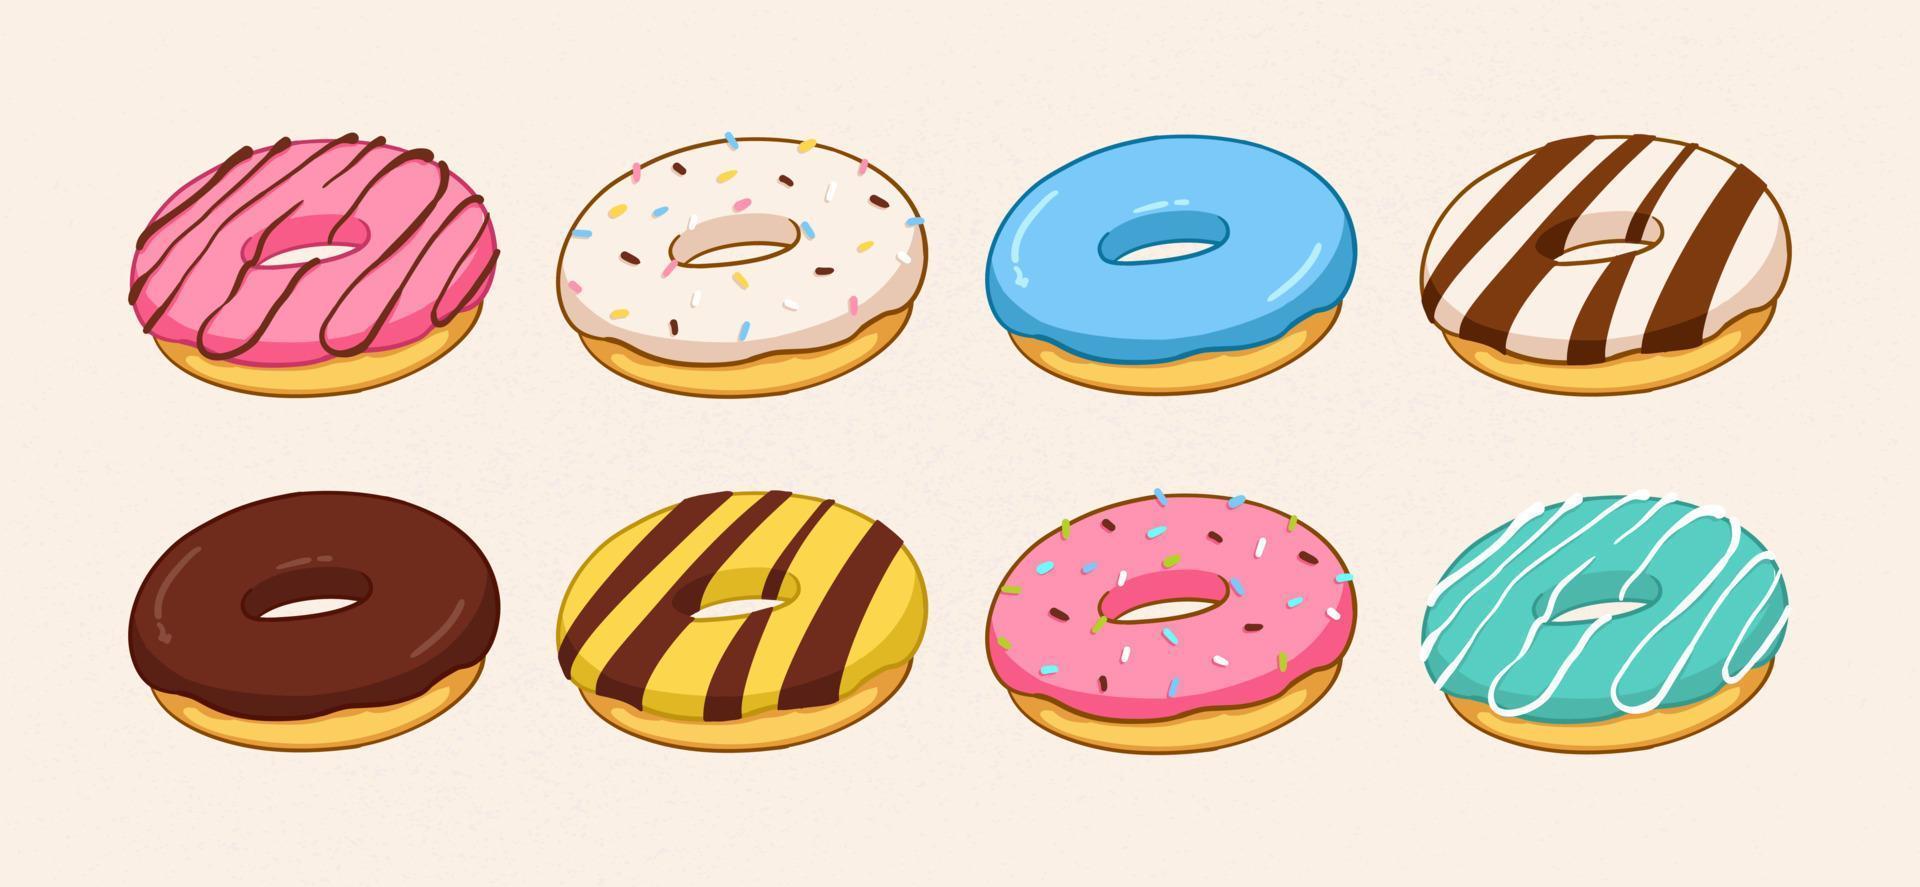 Set of cartoon colorful donuts isolated on white background. Side view. Doughnuts collection into glaze for menu design, cafe decoration, delivery box. vector illustration in flat style